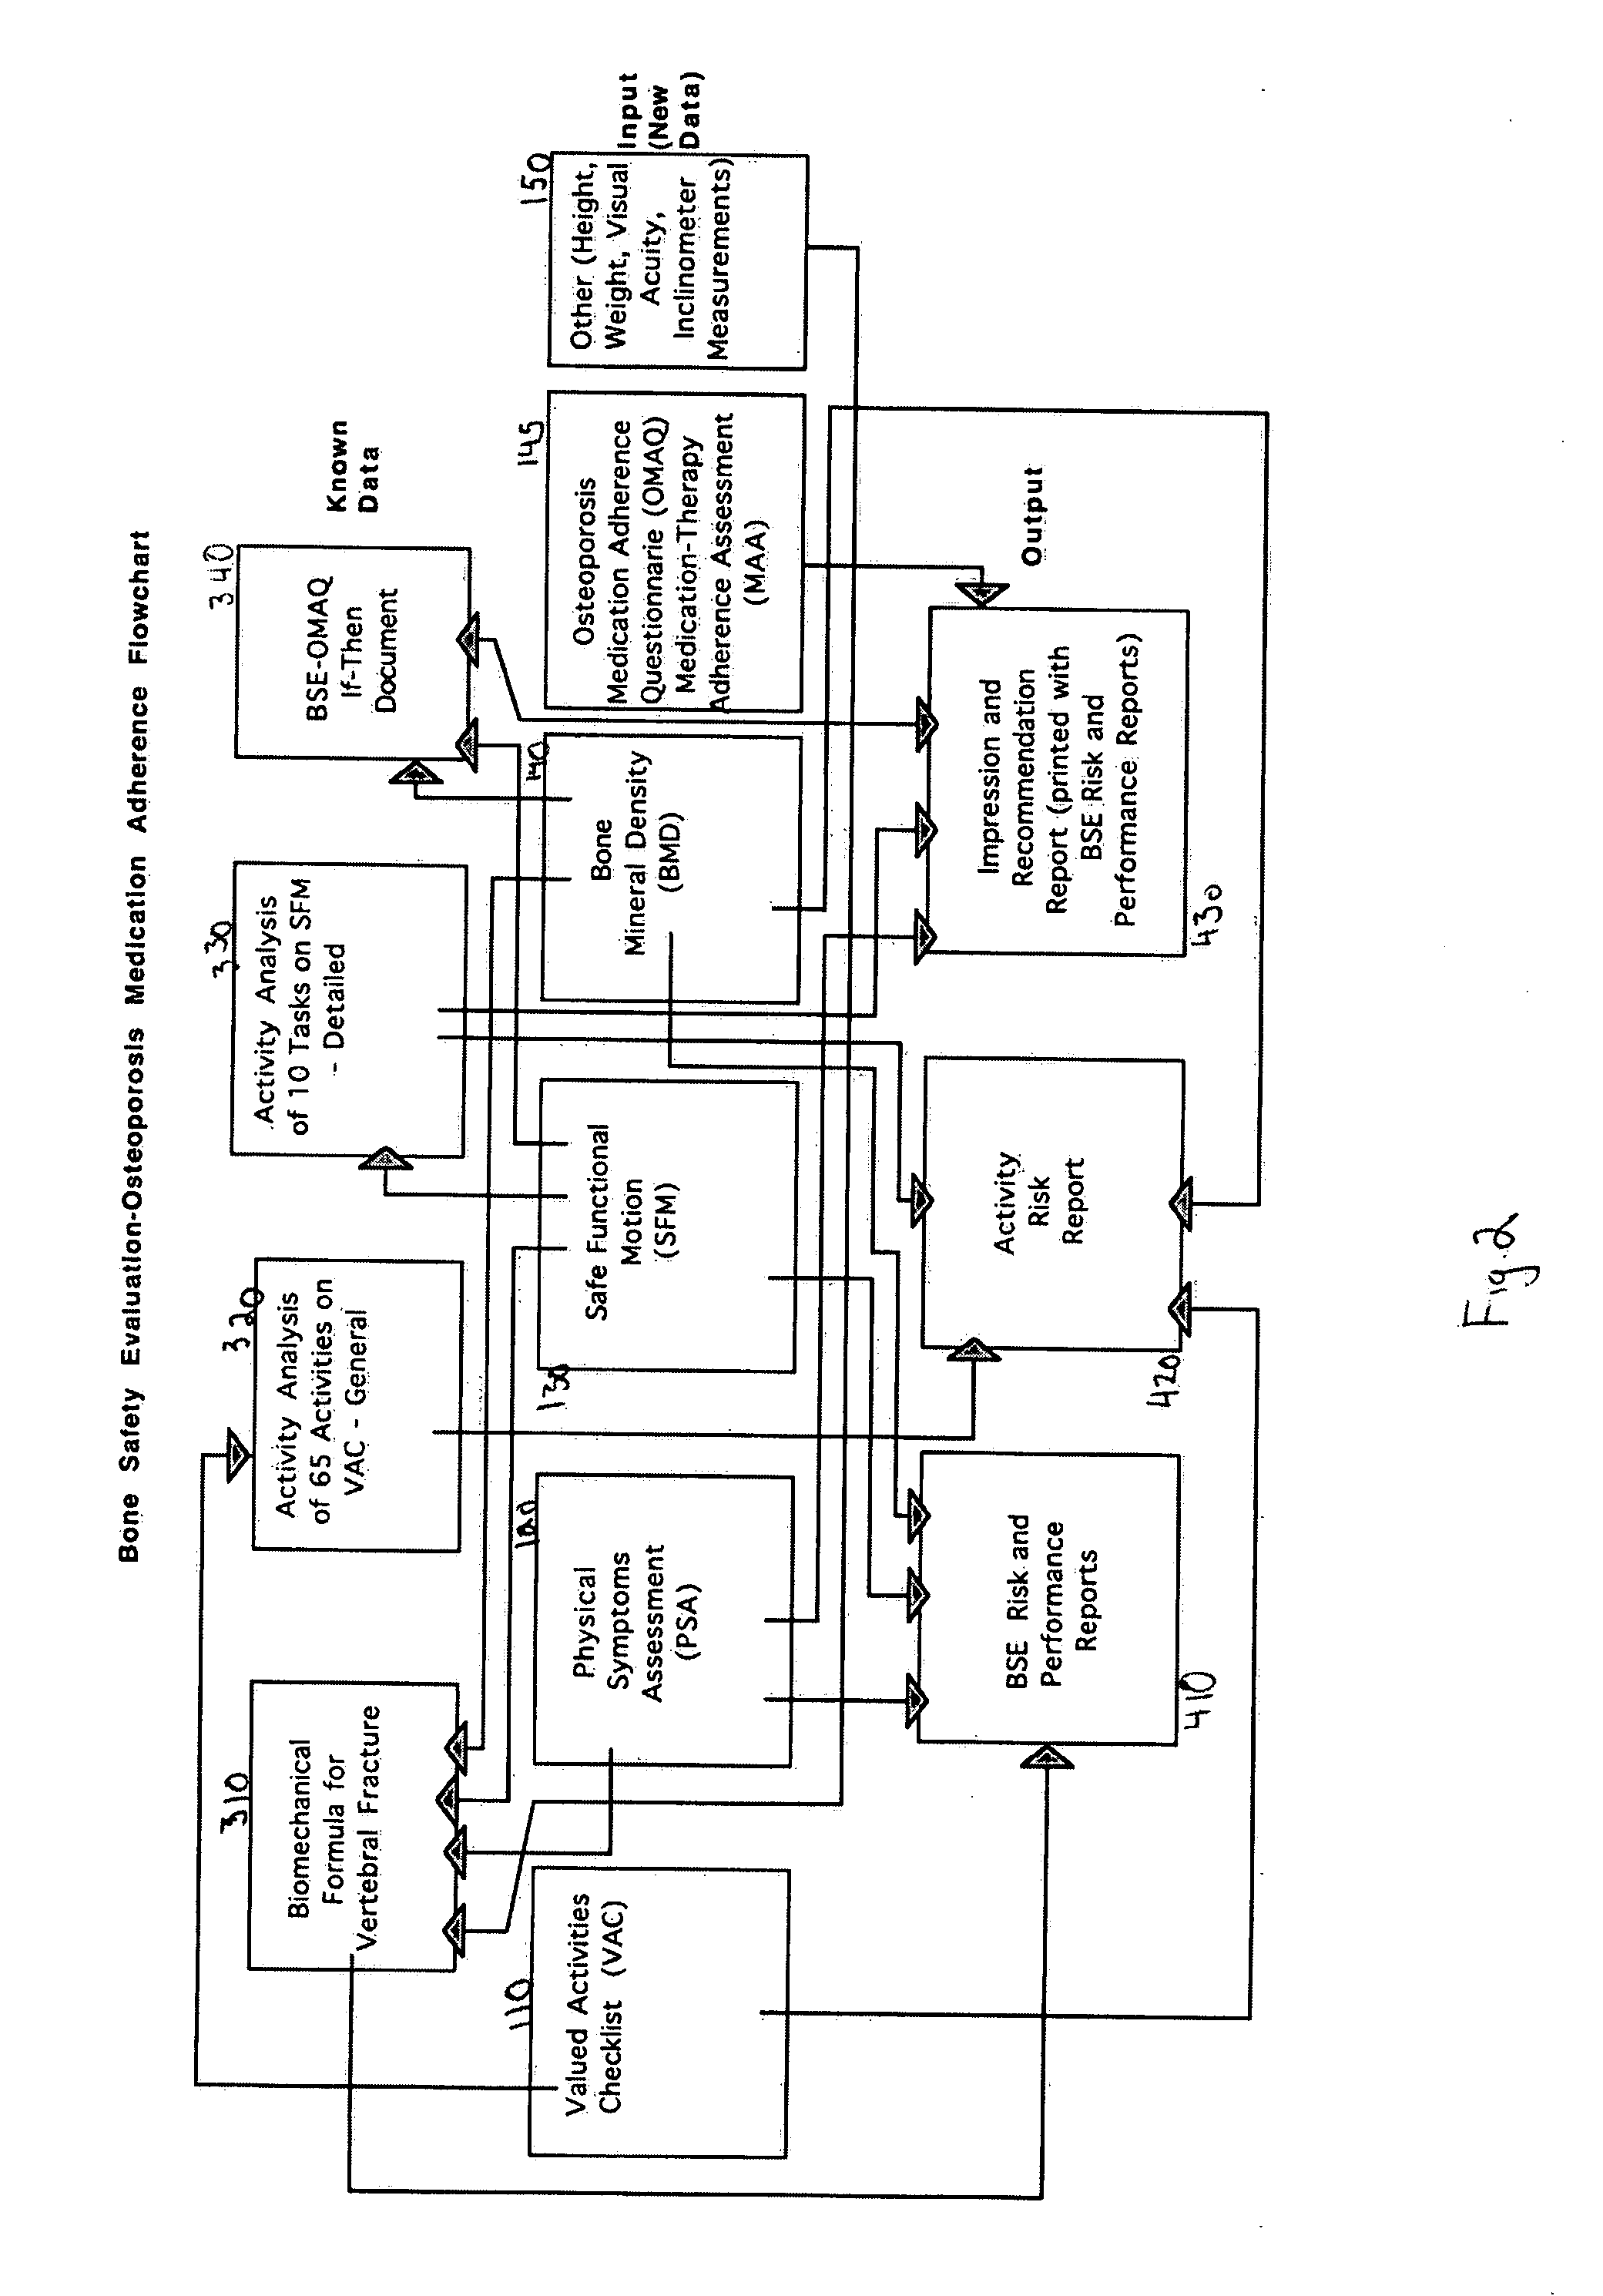 System and method for osteoporosis assessment and medication adherence evaluation